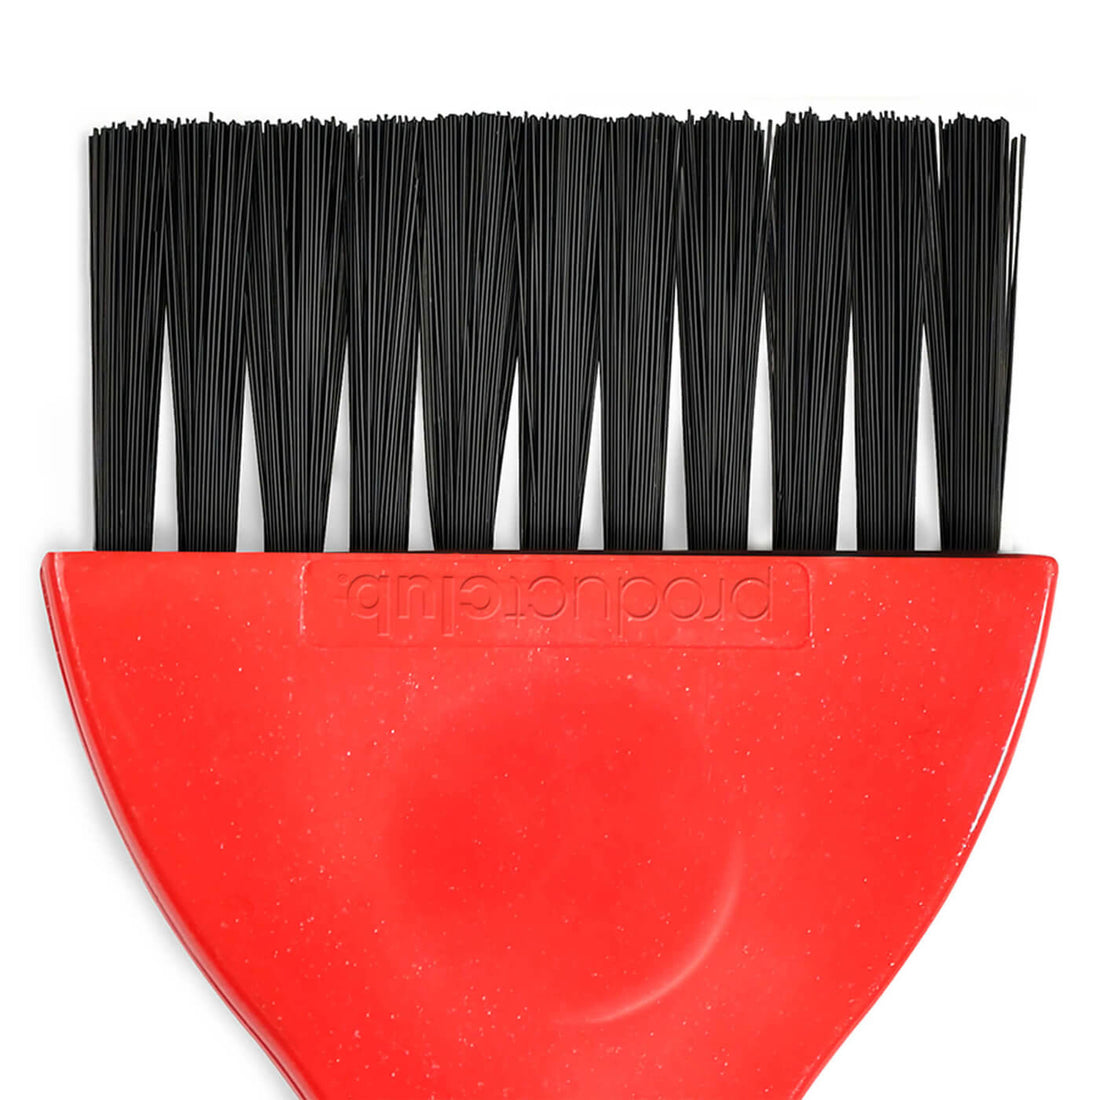 Product Club 2-in-1 Color Brush - Red